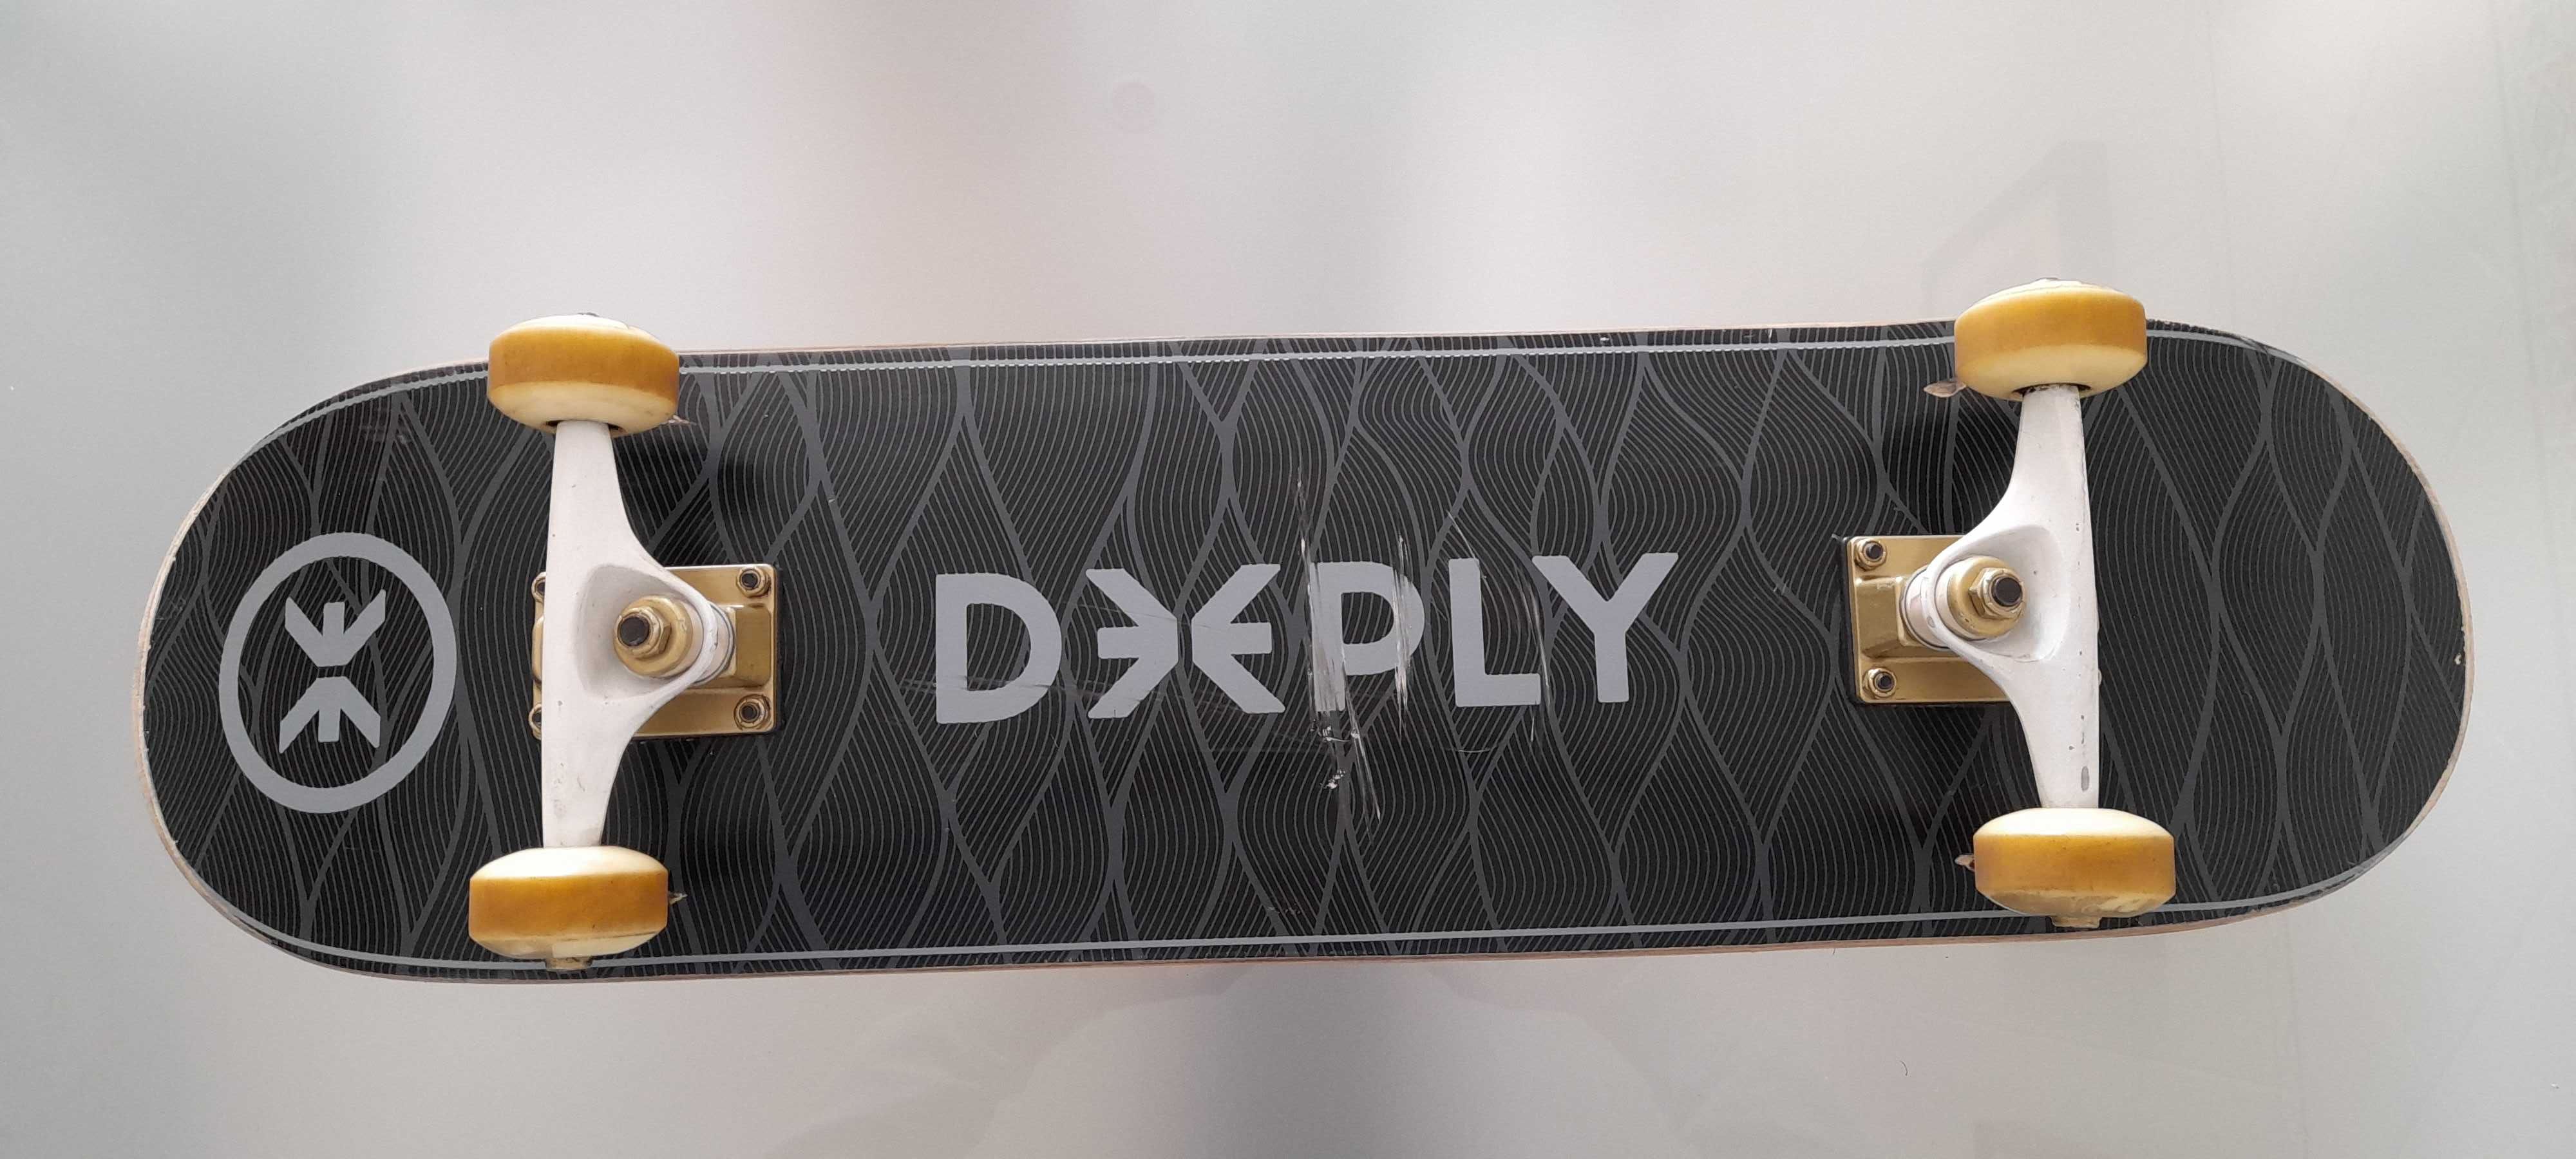 Skate Deeply Special Edition